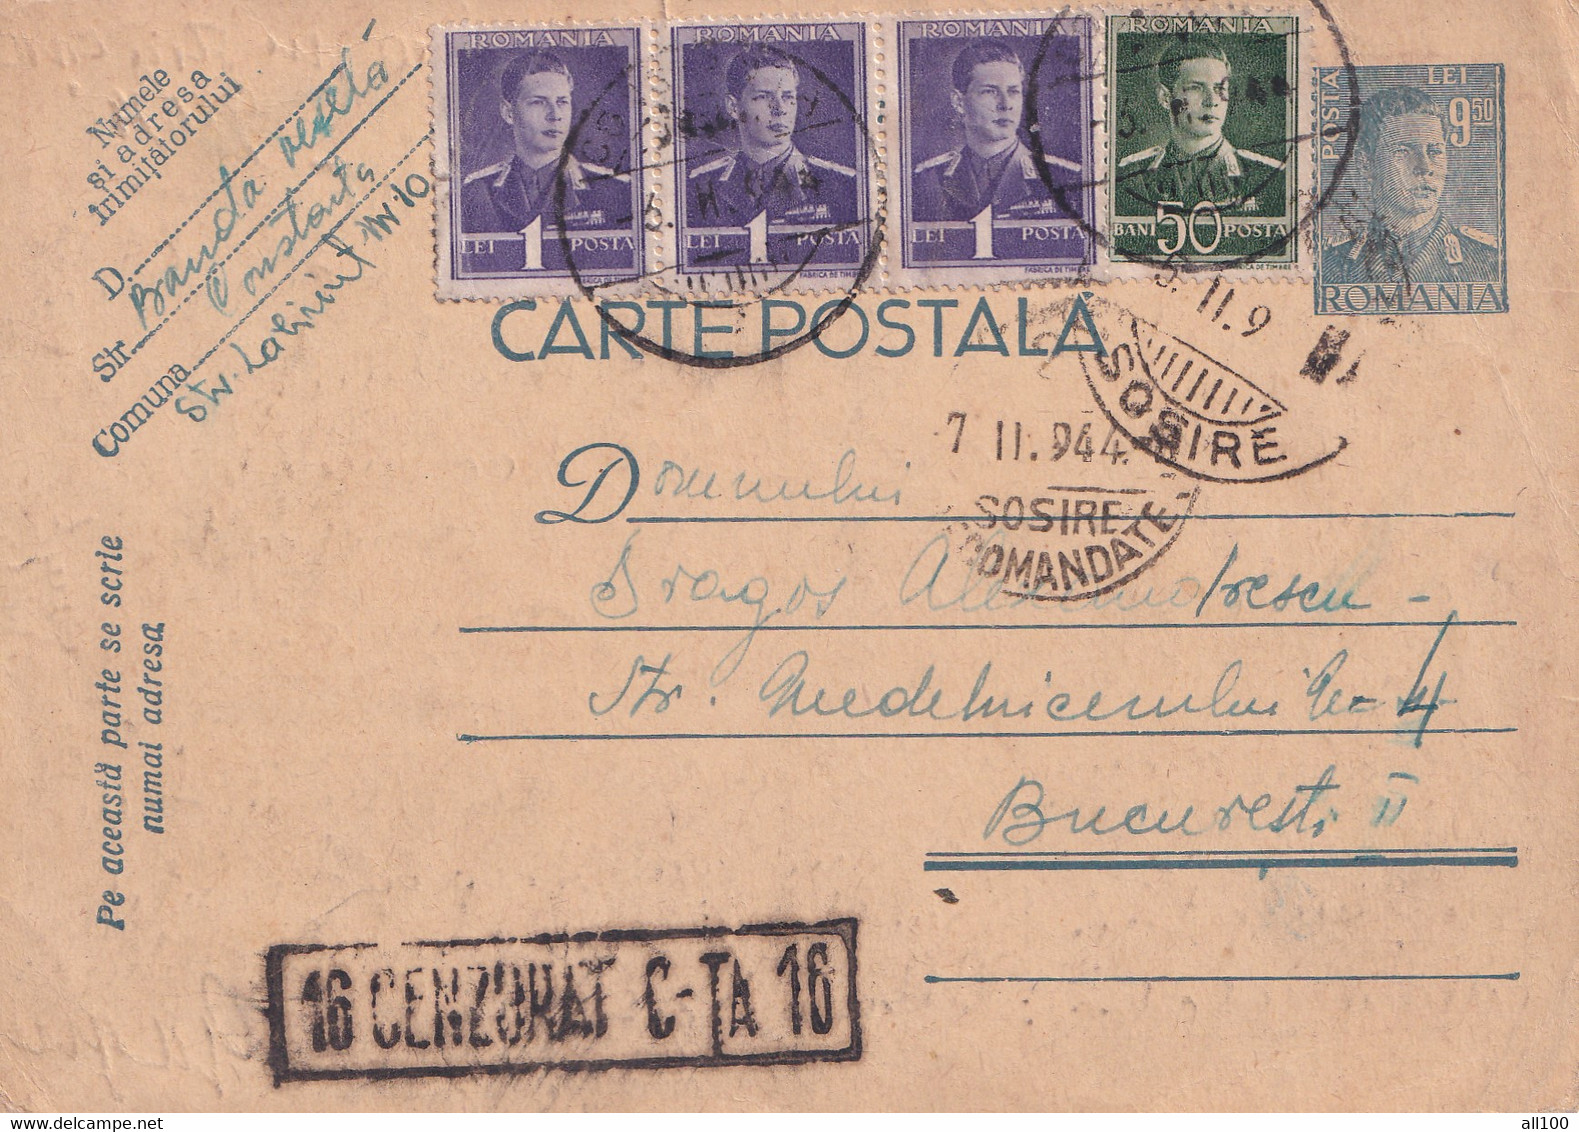 A16424-  MILITARY POSTAL STATIONERY KING MICHAEL 9.5 LEI CENZURAT CONSTANTA NR. 16 1944  USED - Lettres 2ème Guerre Mondiale